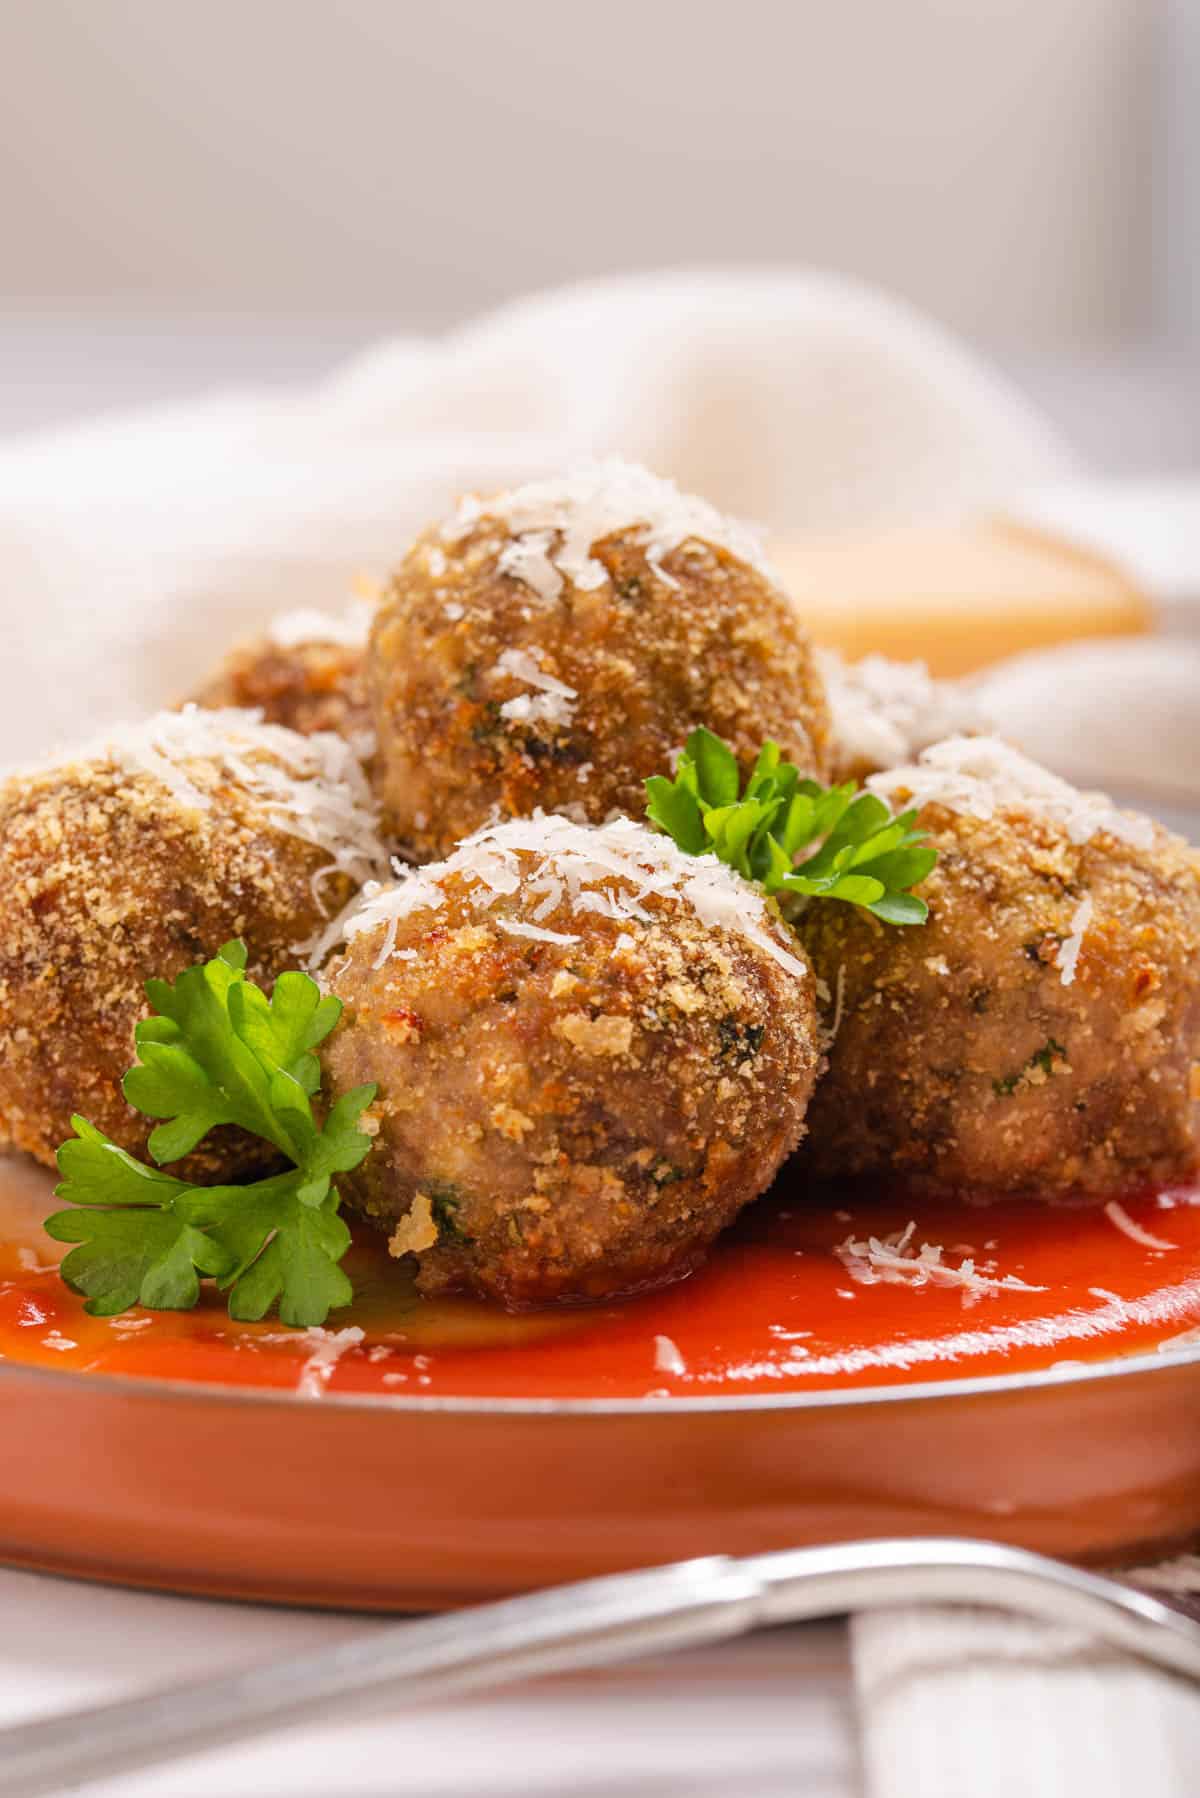 A pile of homemade meatballs stuffed with cheese on a plate with tomato sauce.